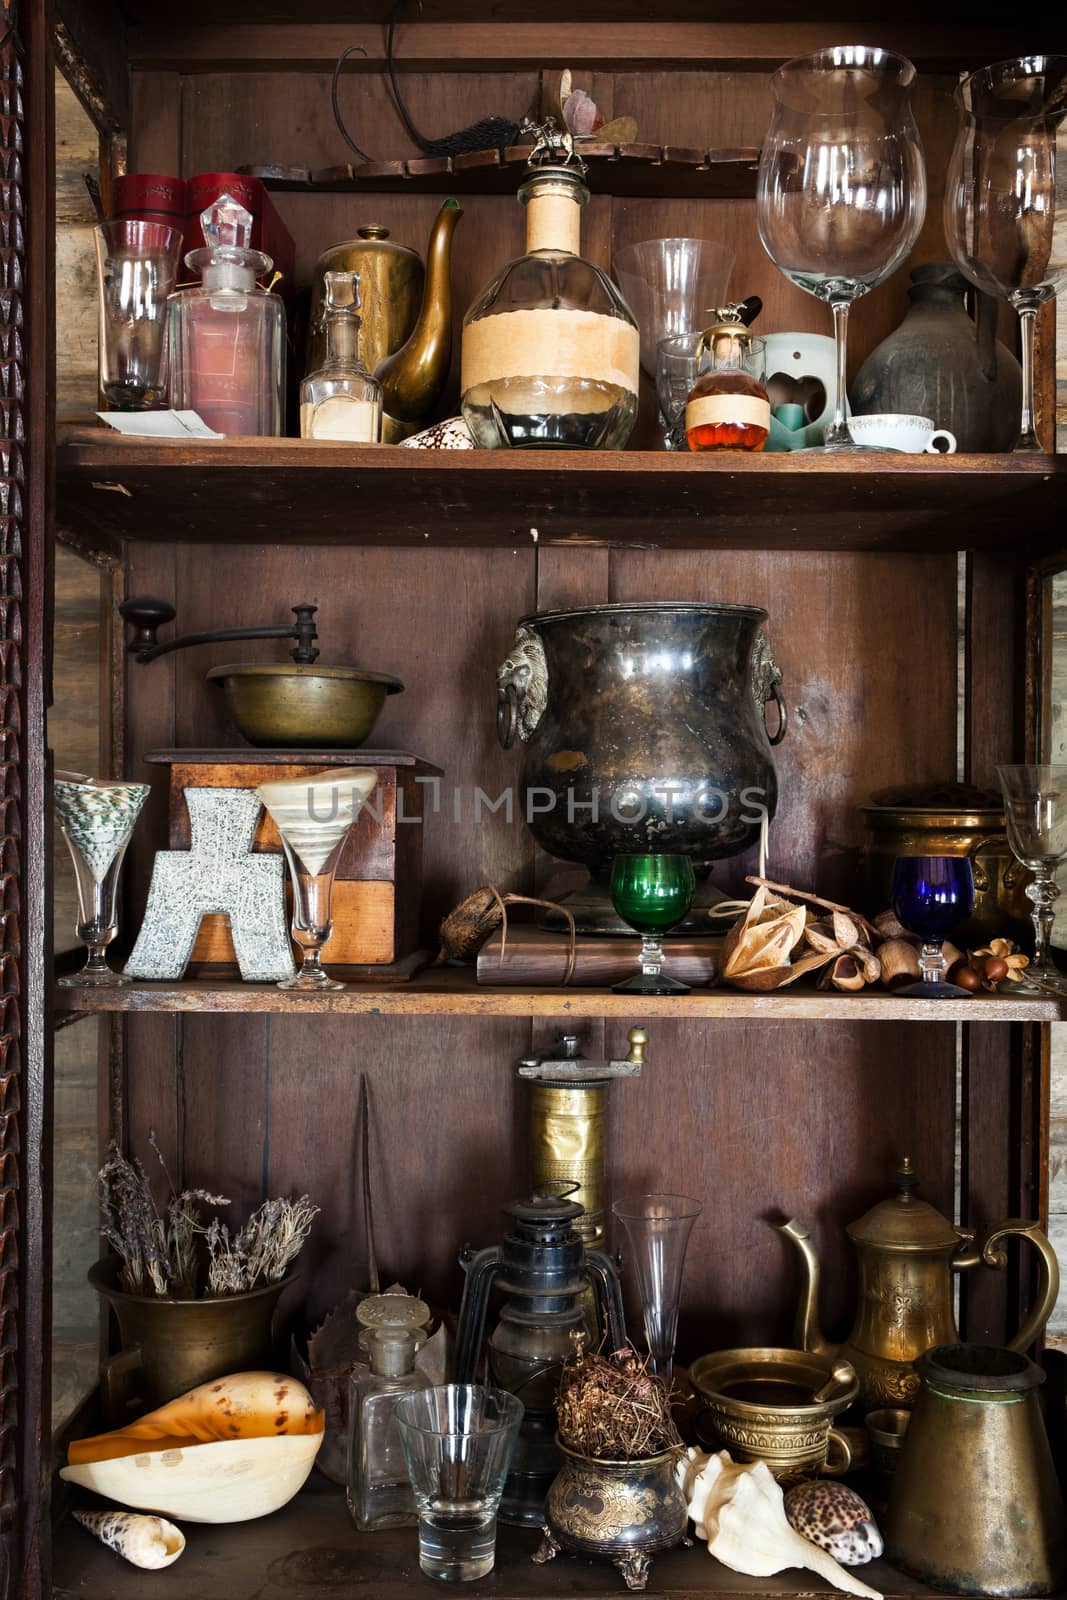 beautiful old objects in the studio of the artist